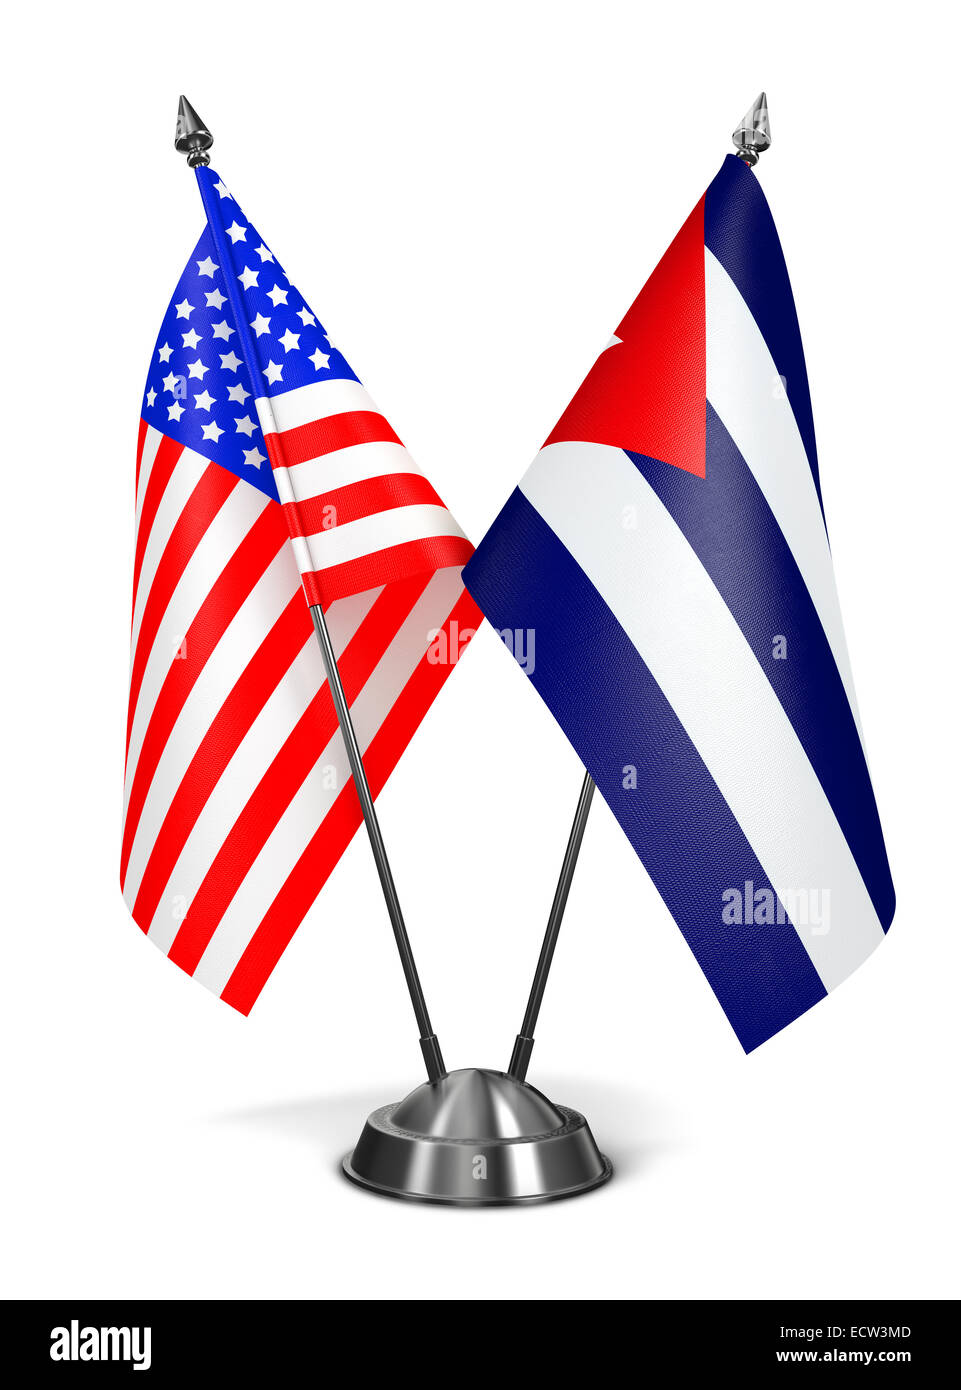 USA and Cuba - Miniature Flags Isolated on White Background. Stock Photo